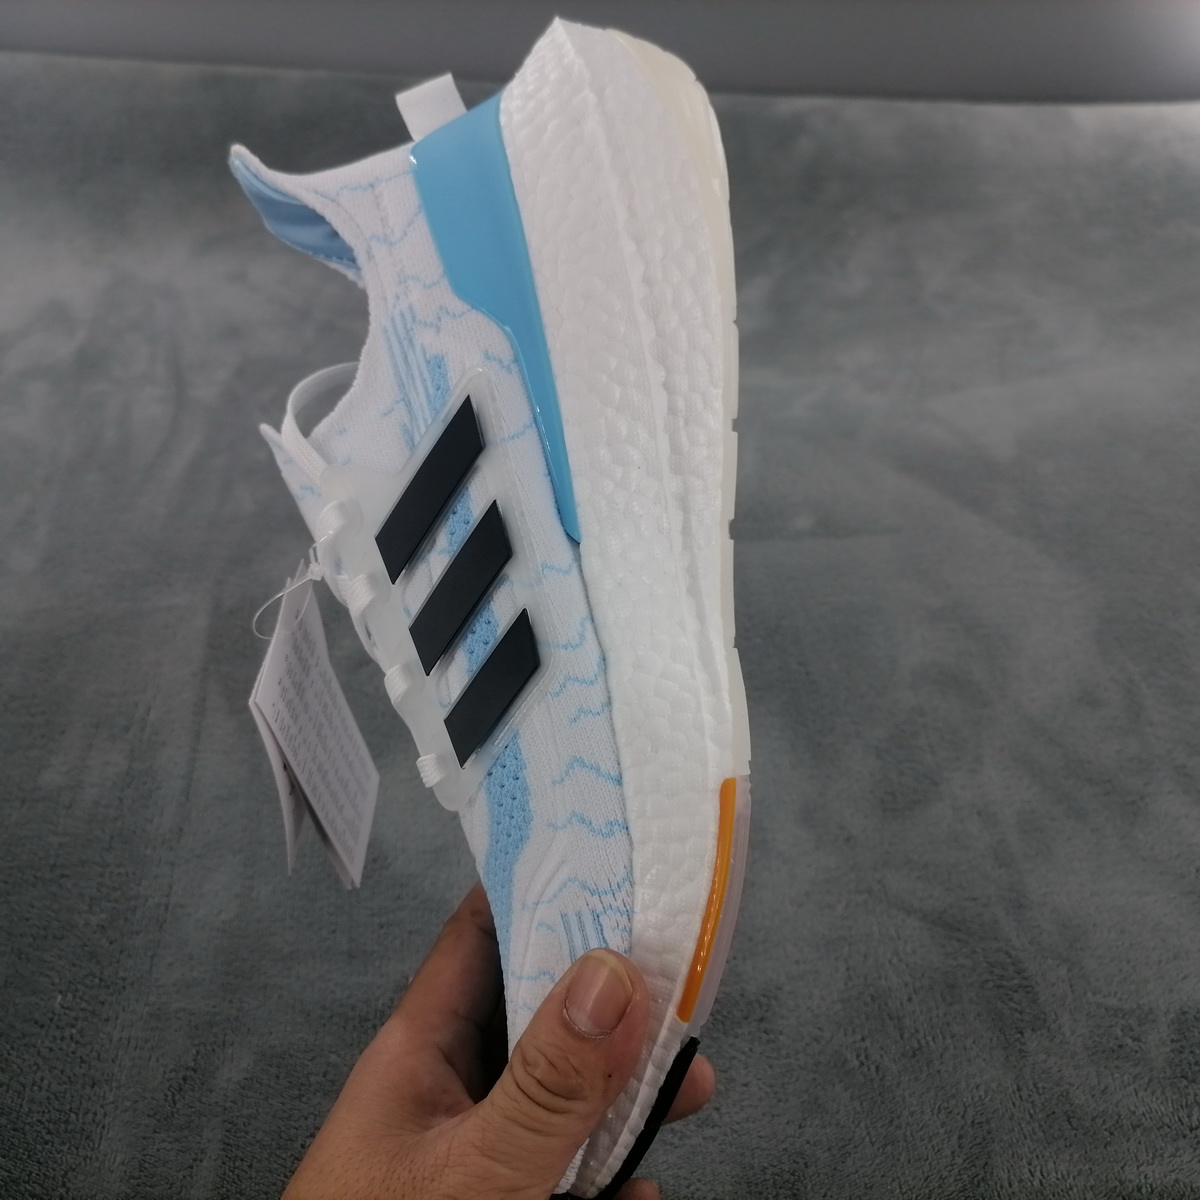 Adidas Ultra Boost 21 Argentina National Soccer GZ7120 - Top Performance Footwear | Limited Edition